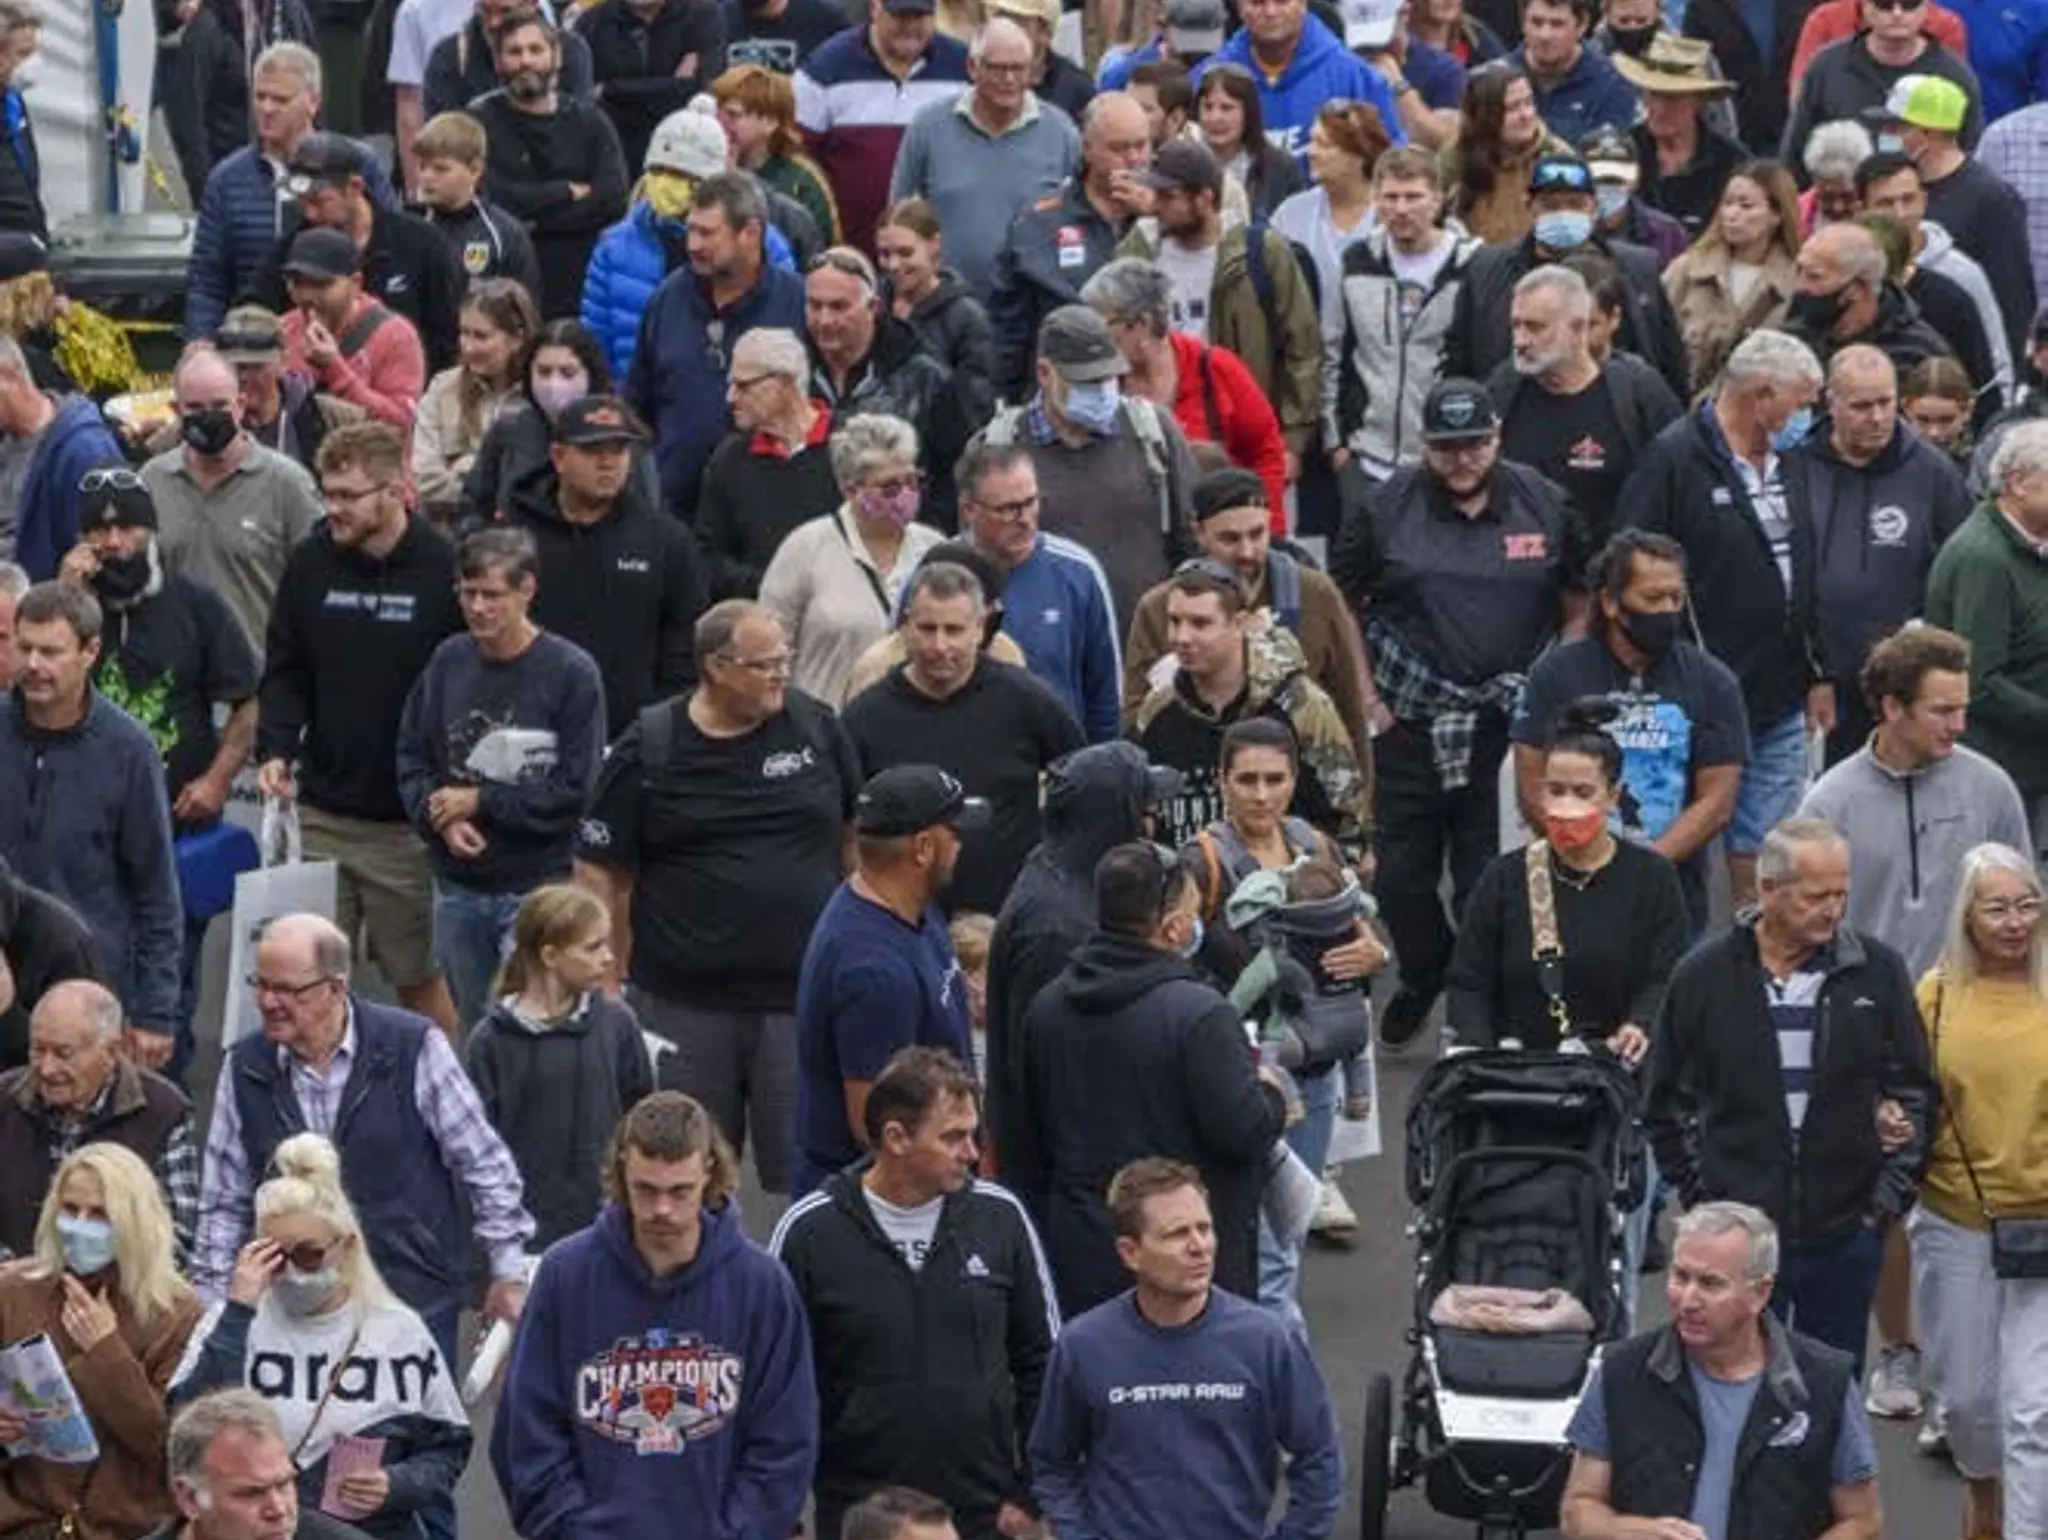 BOATS, BOATS, BOATS AND A BIG ANNOUNCEMENT AT THIS YEAR’S HUTCHWILCO NEW ZEALAND BOAT SHOW